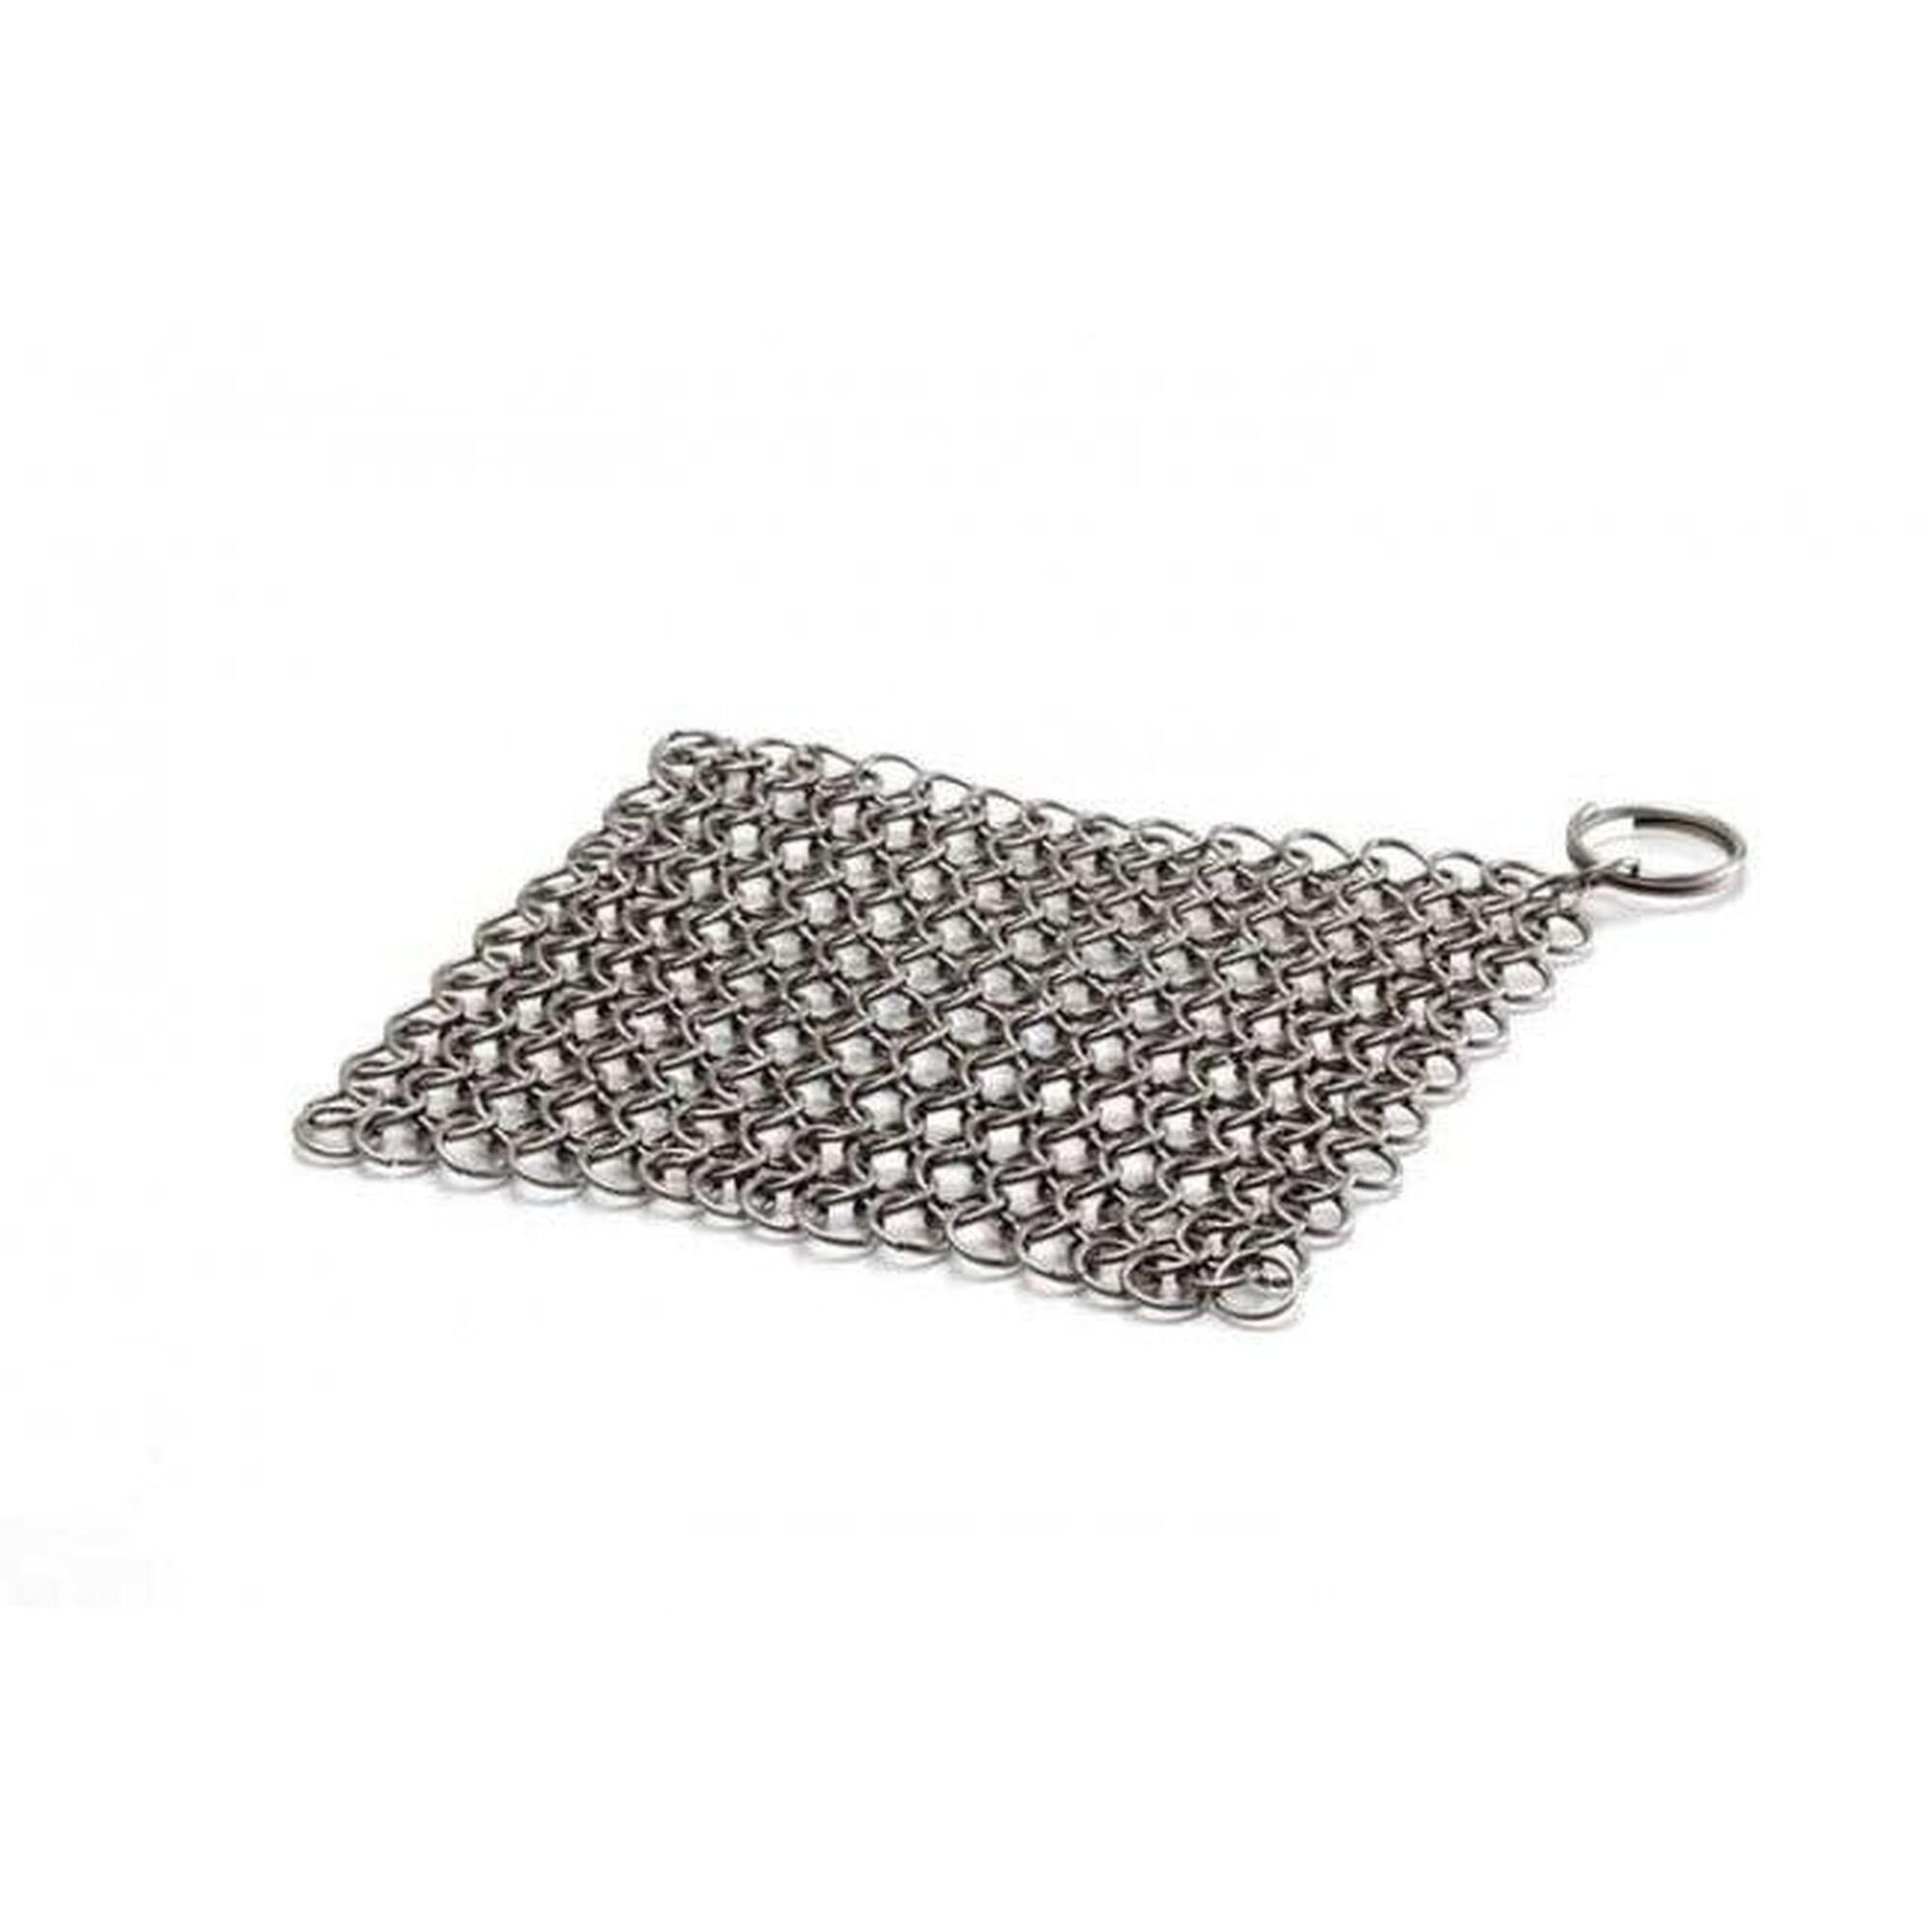 Petromax Chain Mail Scrubber / Cleaner